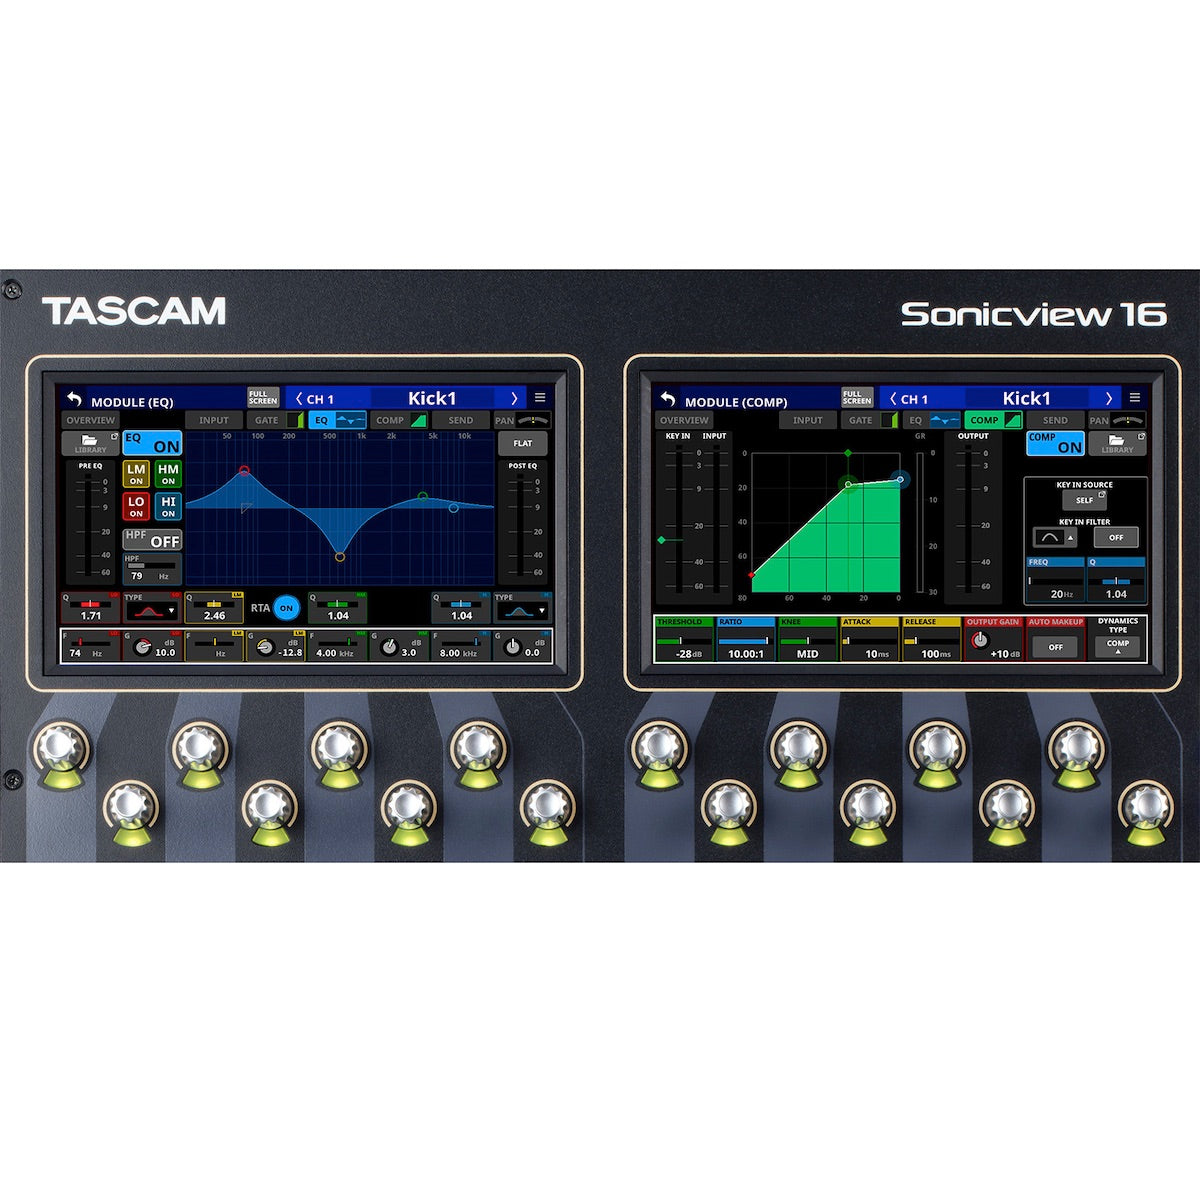 TASCAM Sonicview 16XP - 16-input Digital Recording and Mixing Console, module view